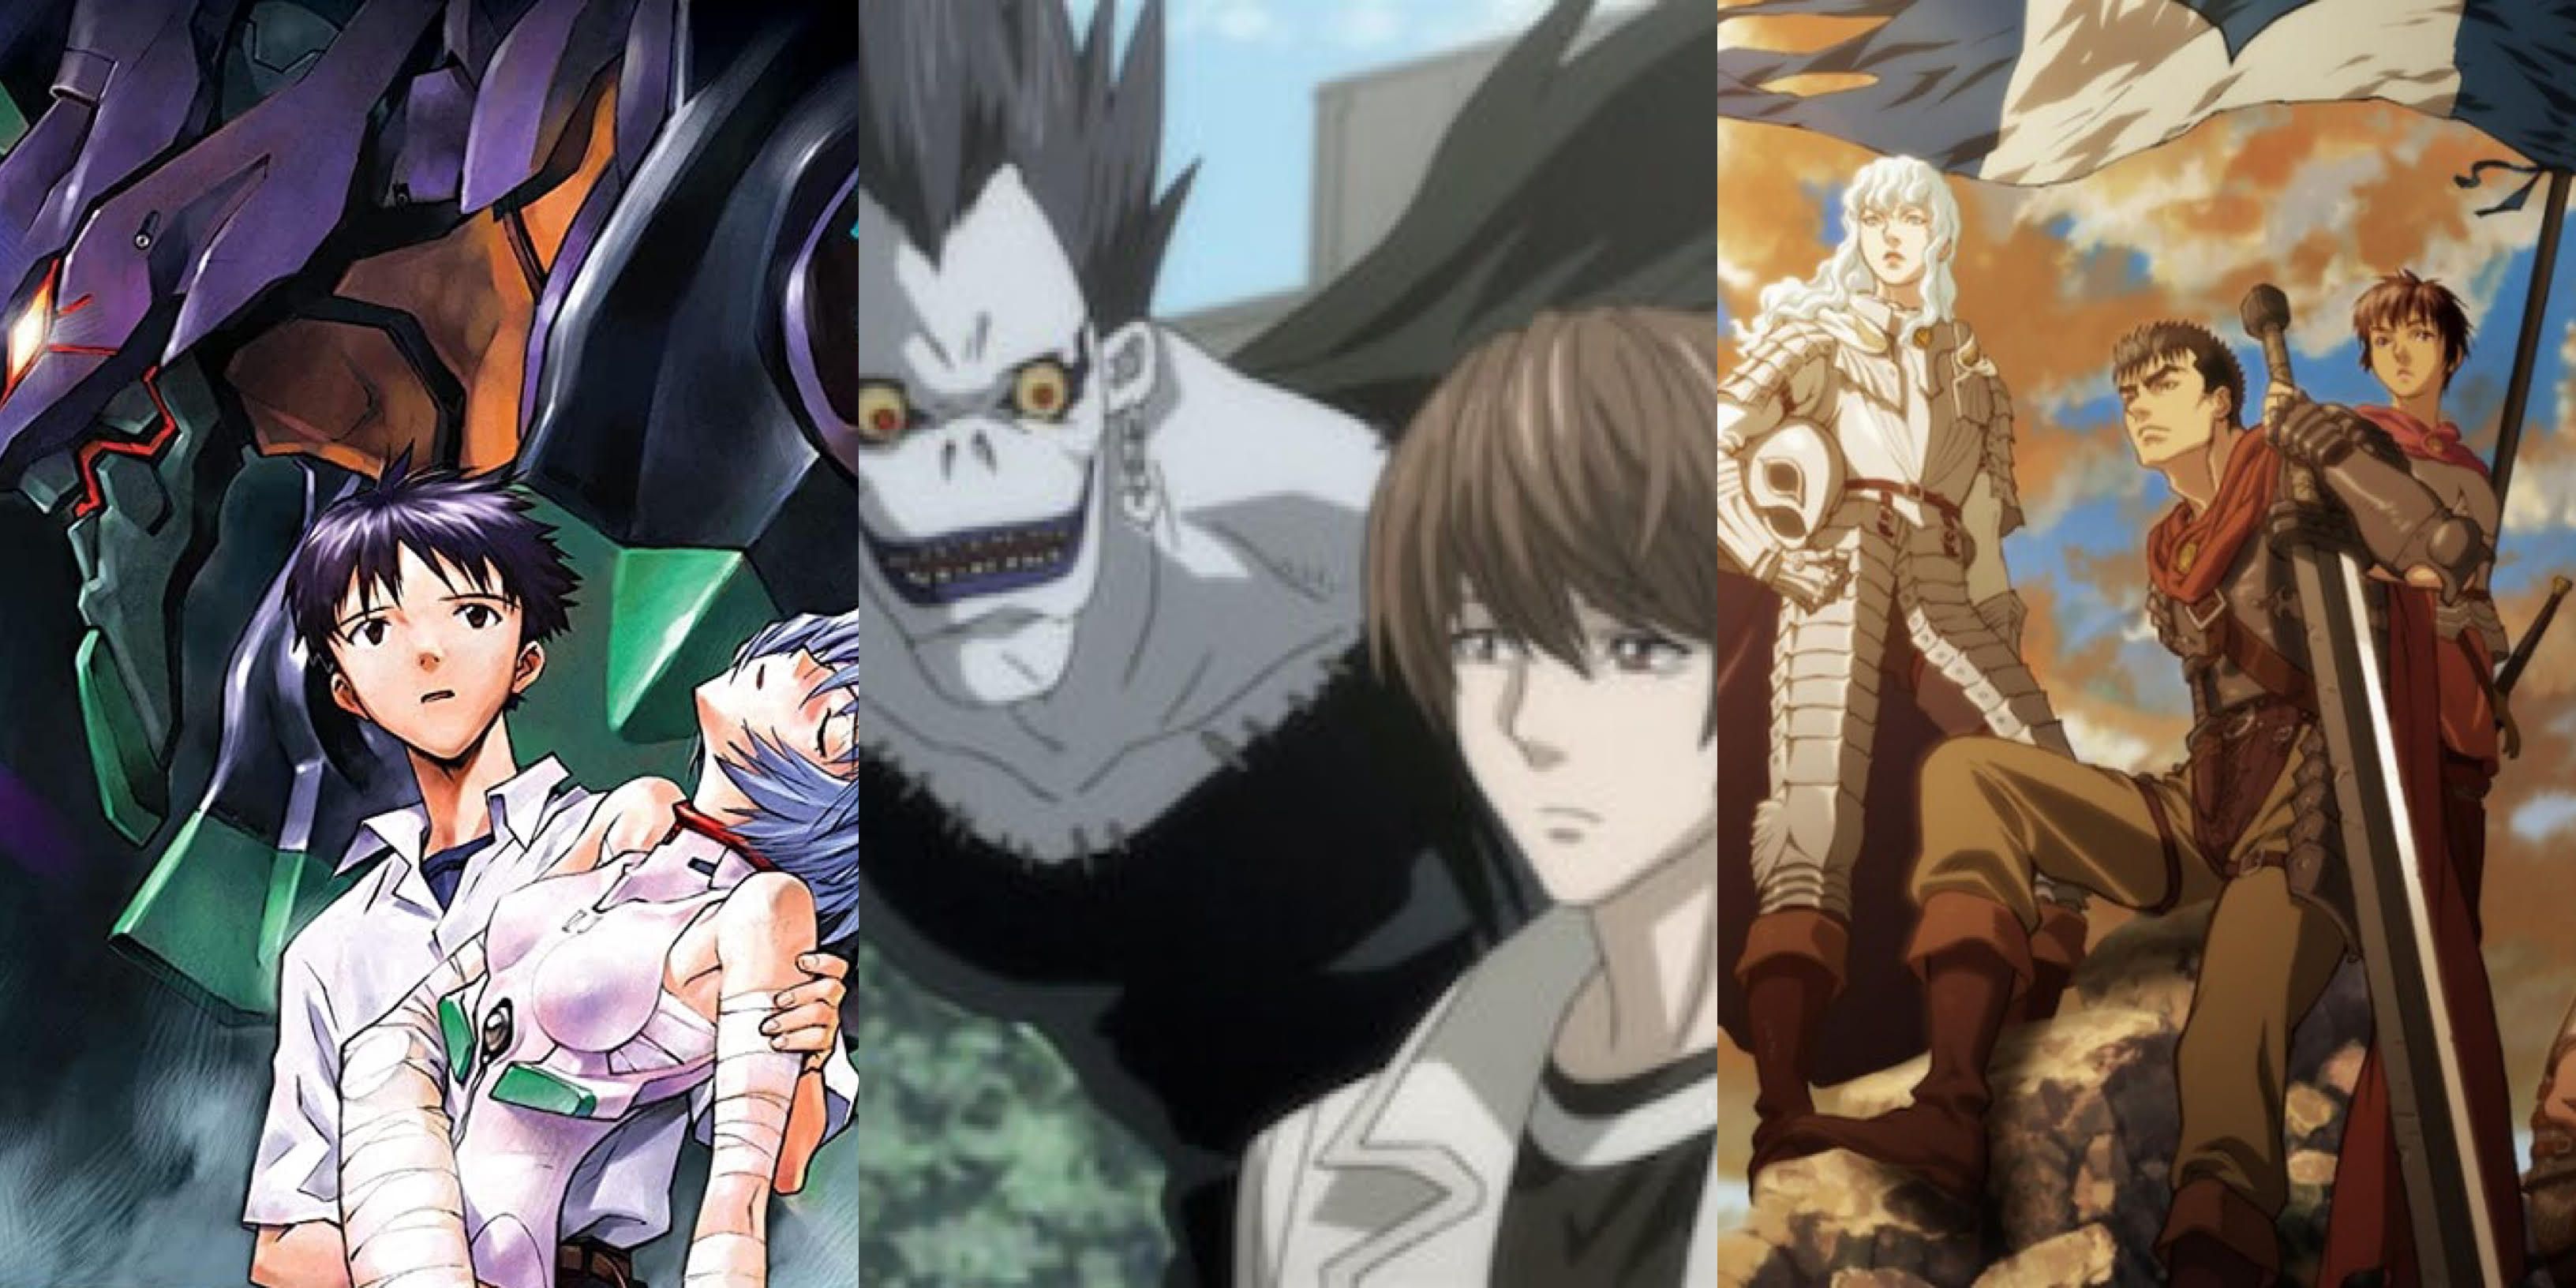 Intense Anime: Neon Genesis Evangelion (left), Death Note (middle), and Berserk (right)